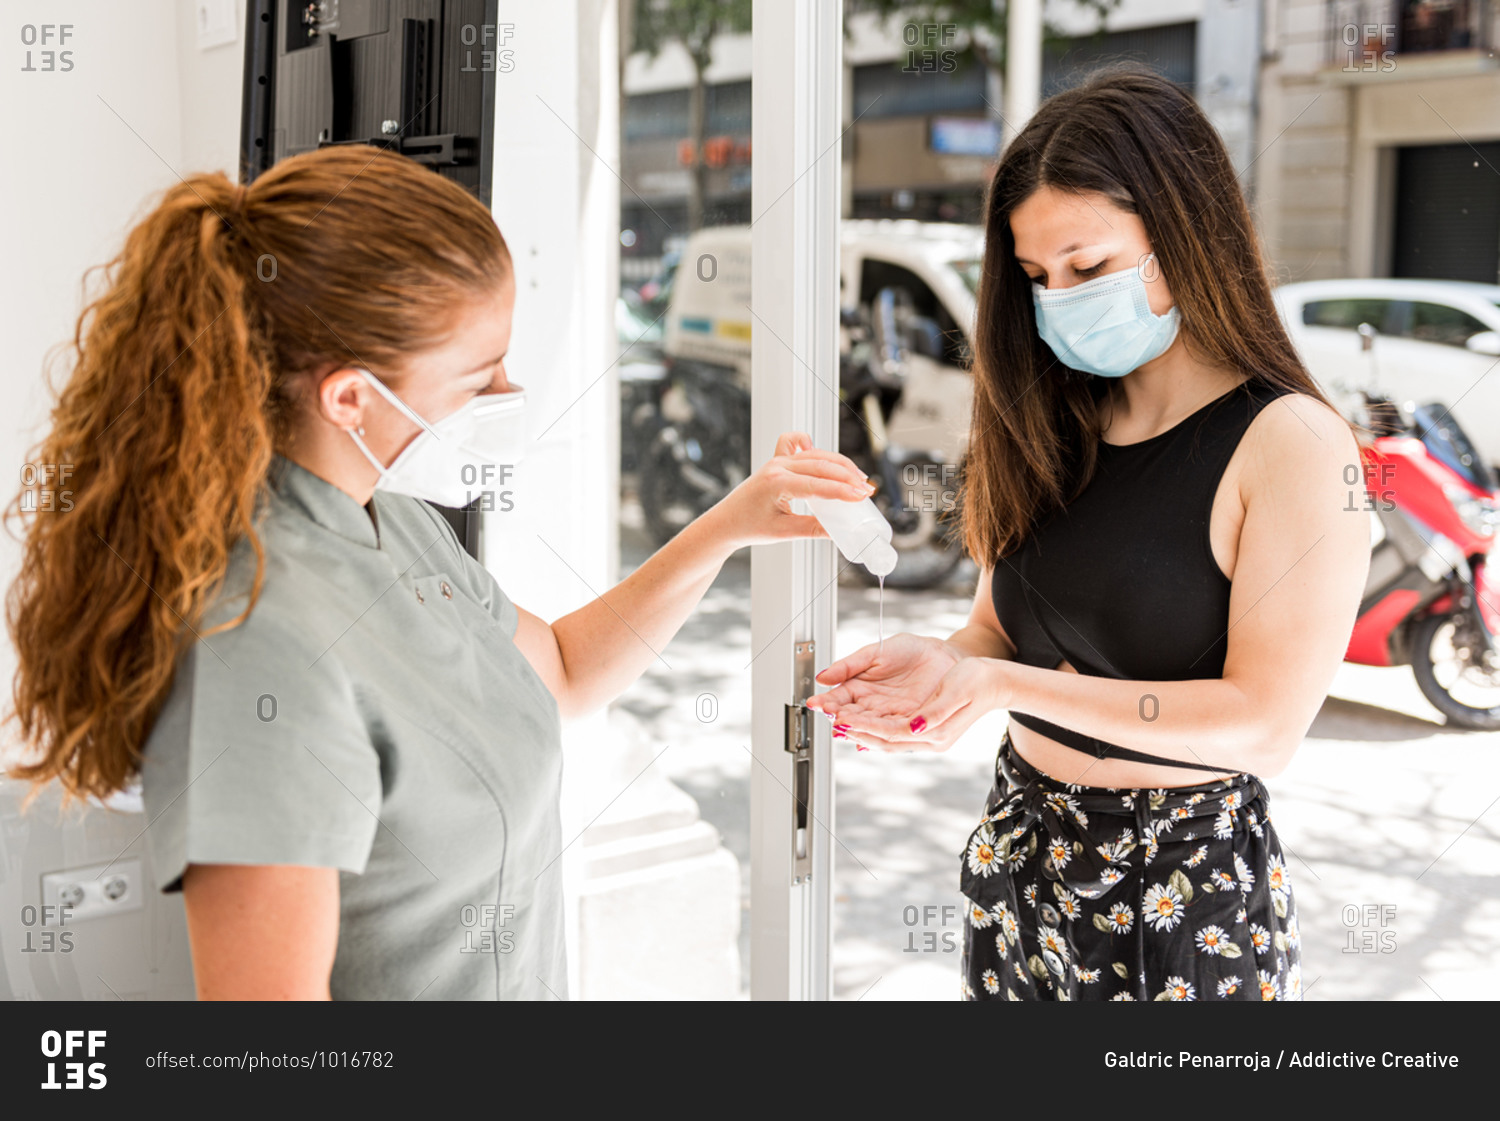 Staff of modern beauty salon applying sanitizer for disinfection to hands of young female customer in protective mask before entering office